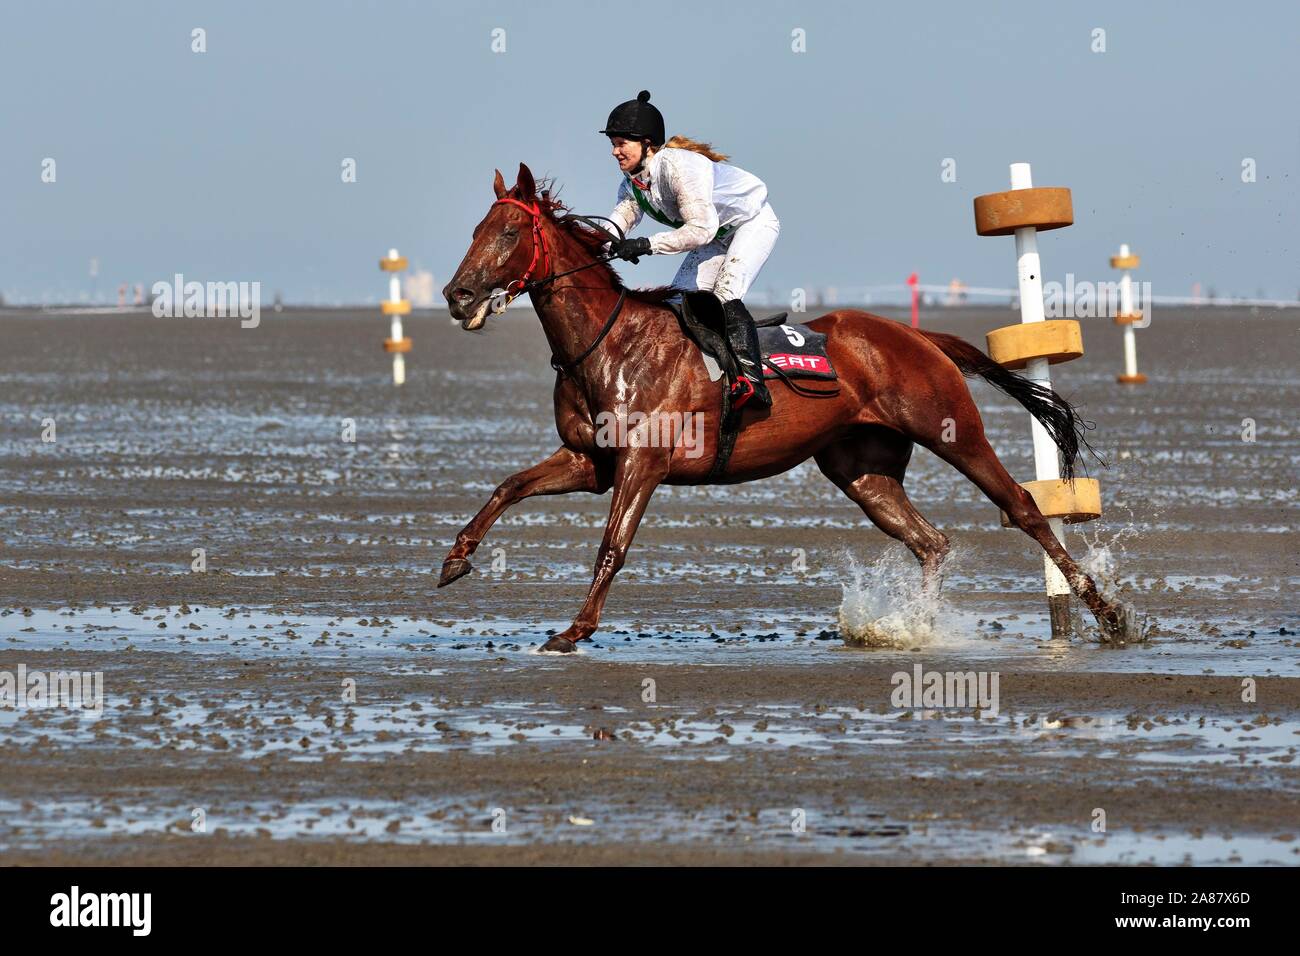 Rider in gallop, horse race in the Wadden Sea, Duhne mudflat race, Cuxhaven, Lower Saxony, Germany Stock Photo